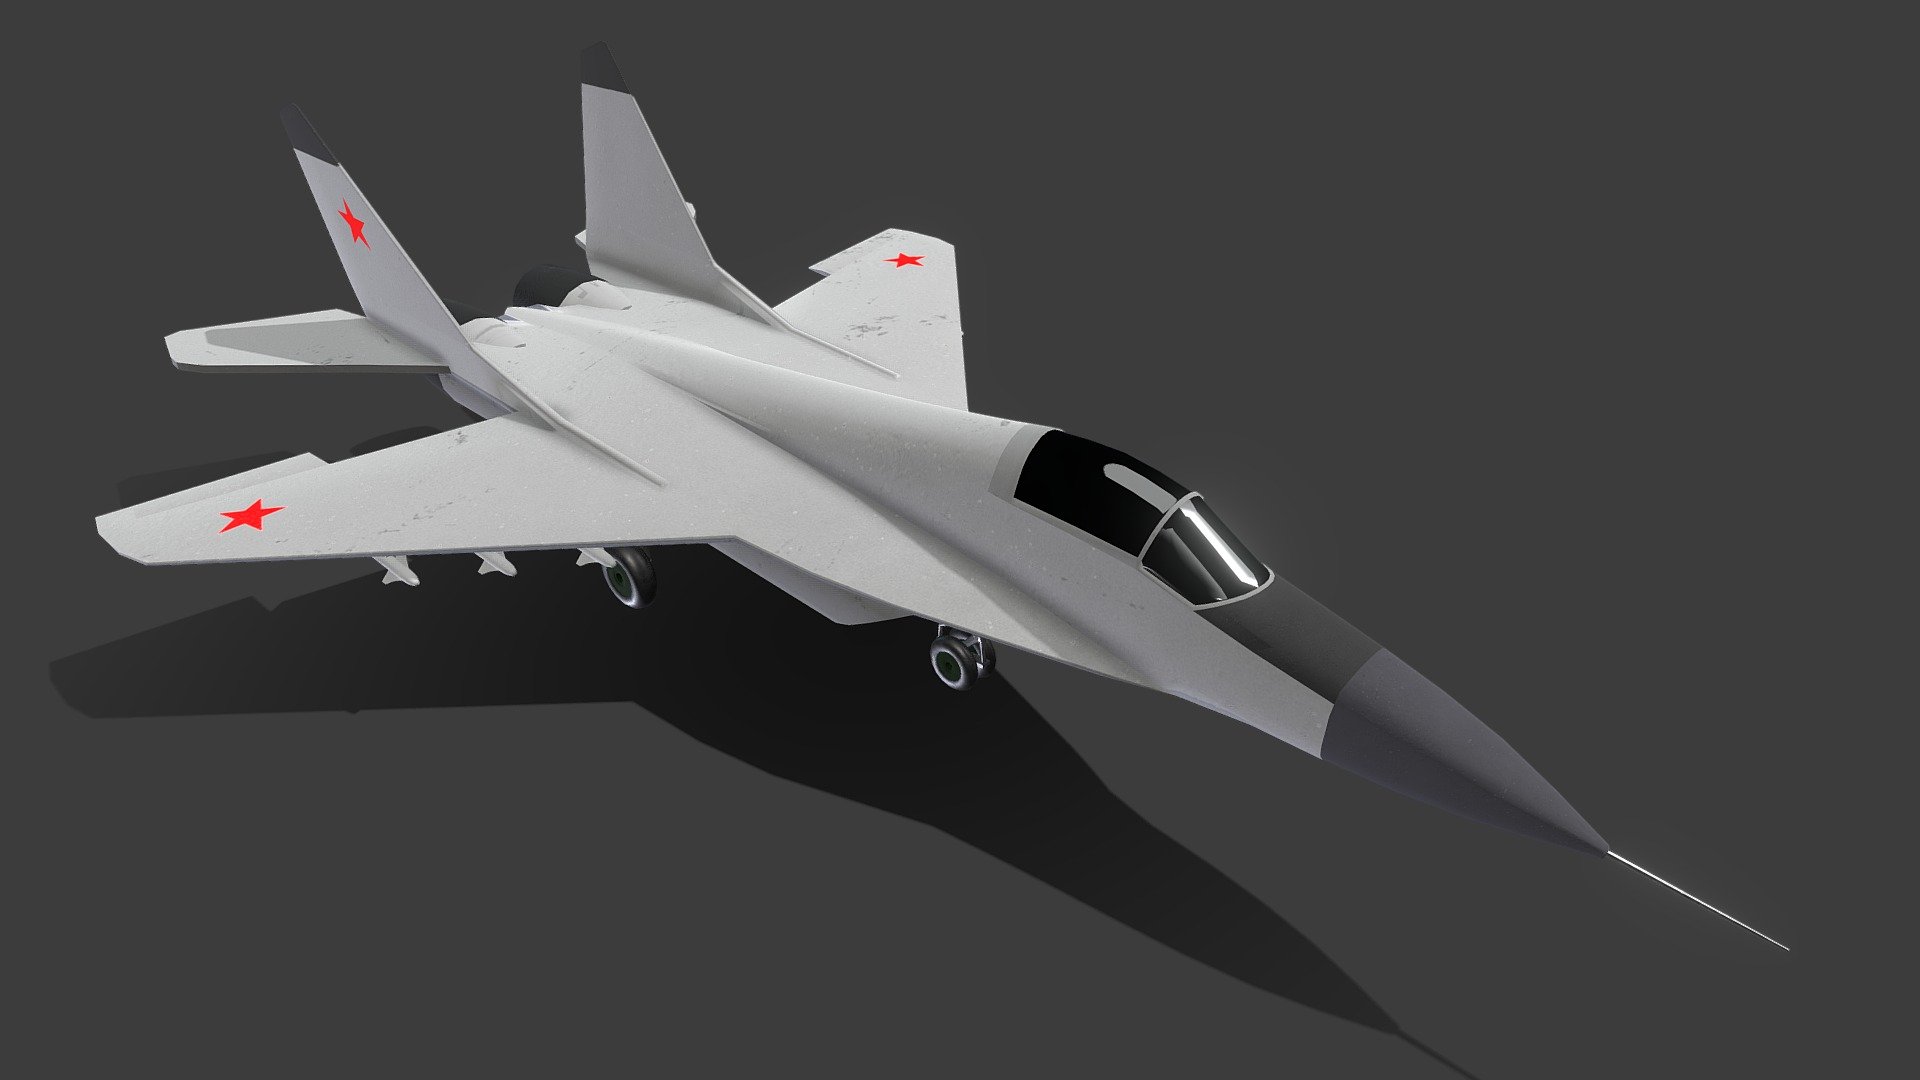 3D Model of the Russian Mikoyan MiG-29A Fighter Jet. Made in Maya and textured in Sunstance Painter 3d model